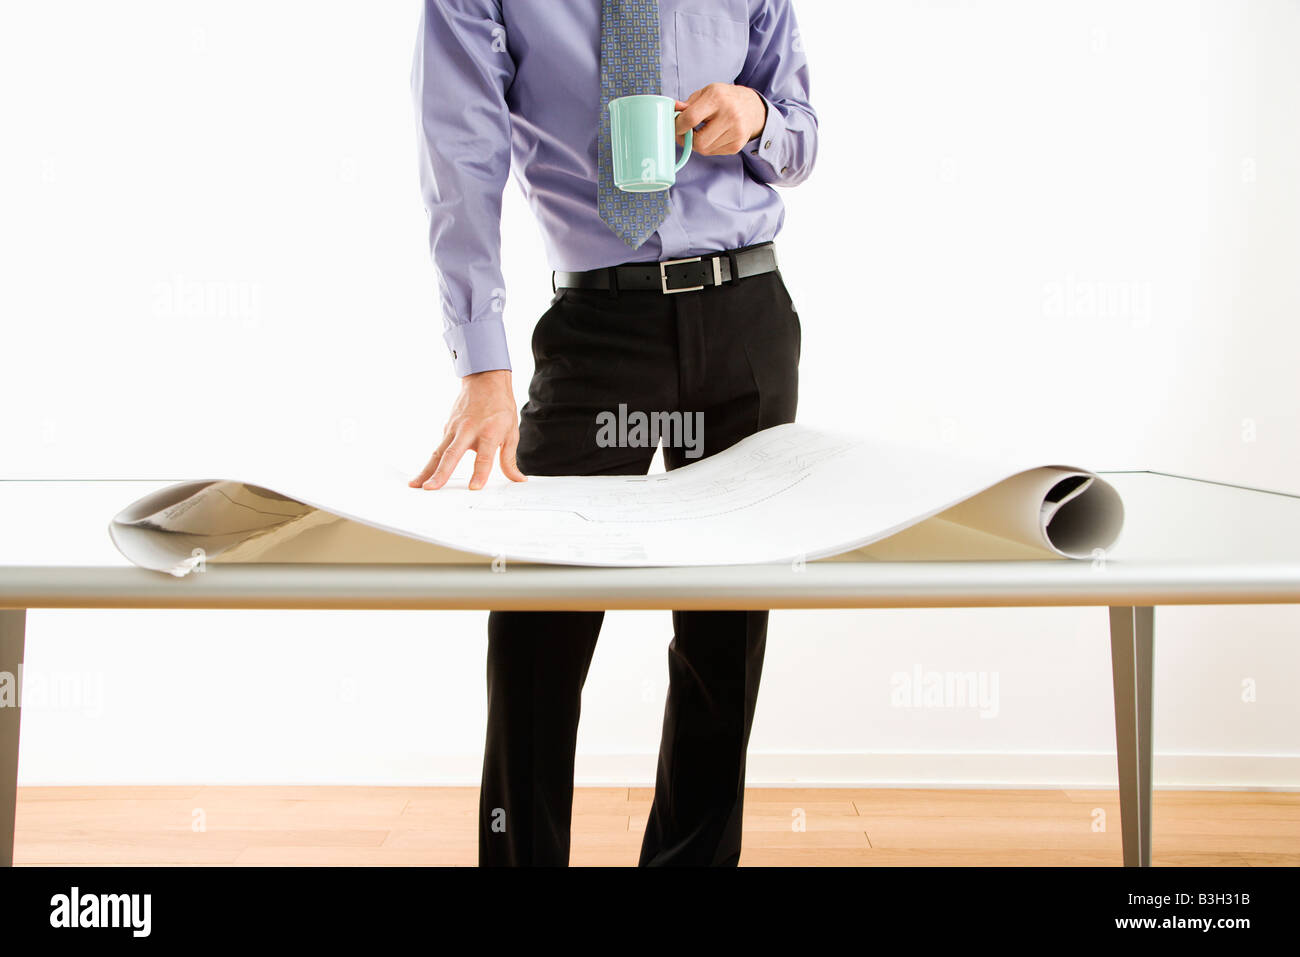 Business man standing with coffee cup next to table with blueprints Stock Photo